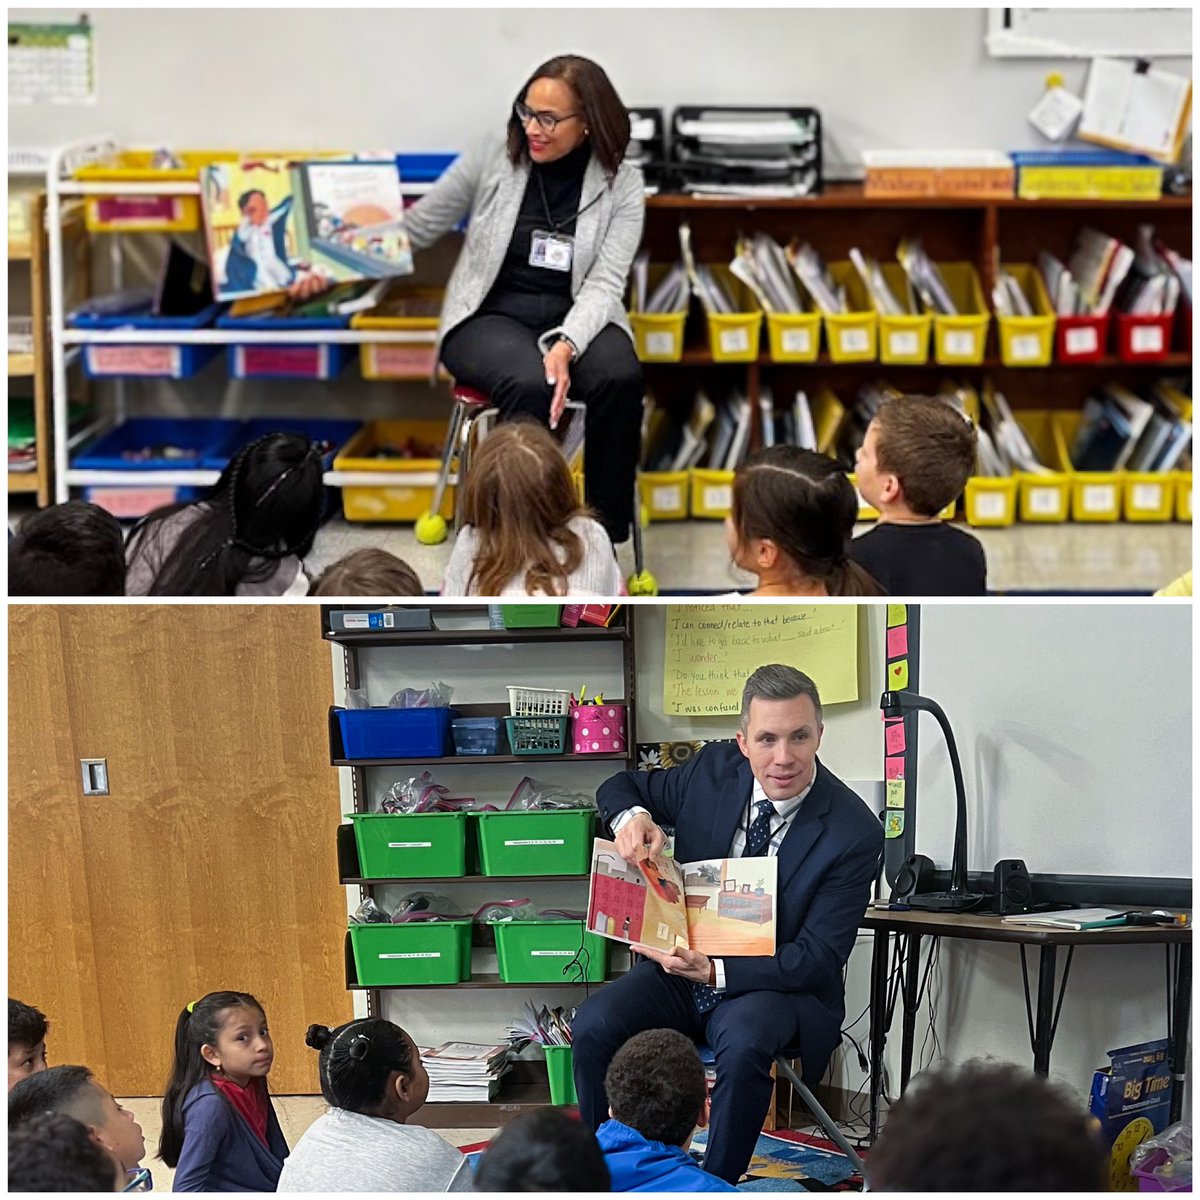 📚 Thank you to the students at Joel Elementary School in Clinton & Park Ave. School in Danbury for welcoming into their classroom Deputy Education Commissioners Sinthia Sone-Moyano & Charles Hewes during #NationalReadingWeek! Your enthusiasm & love of reading is truly inspiring.